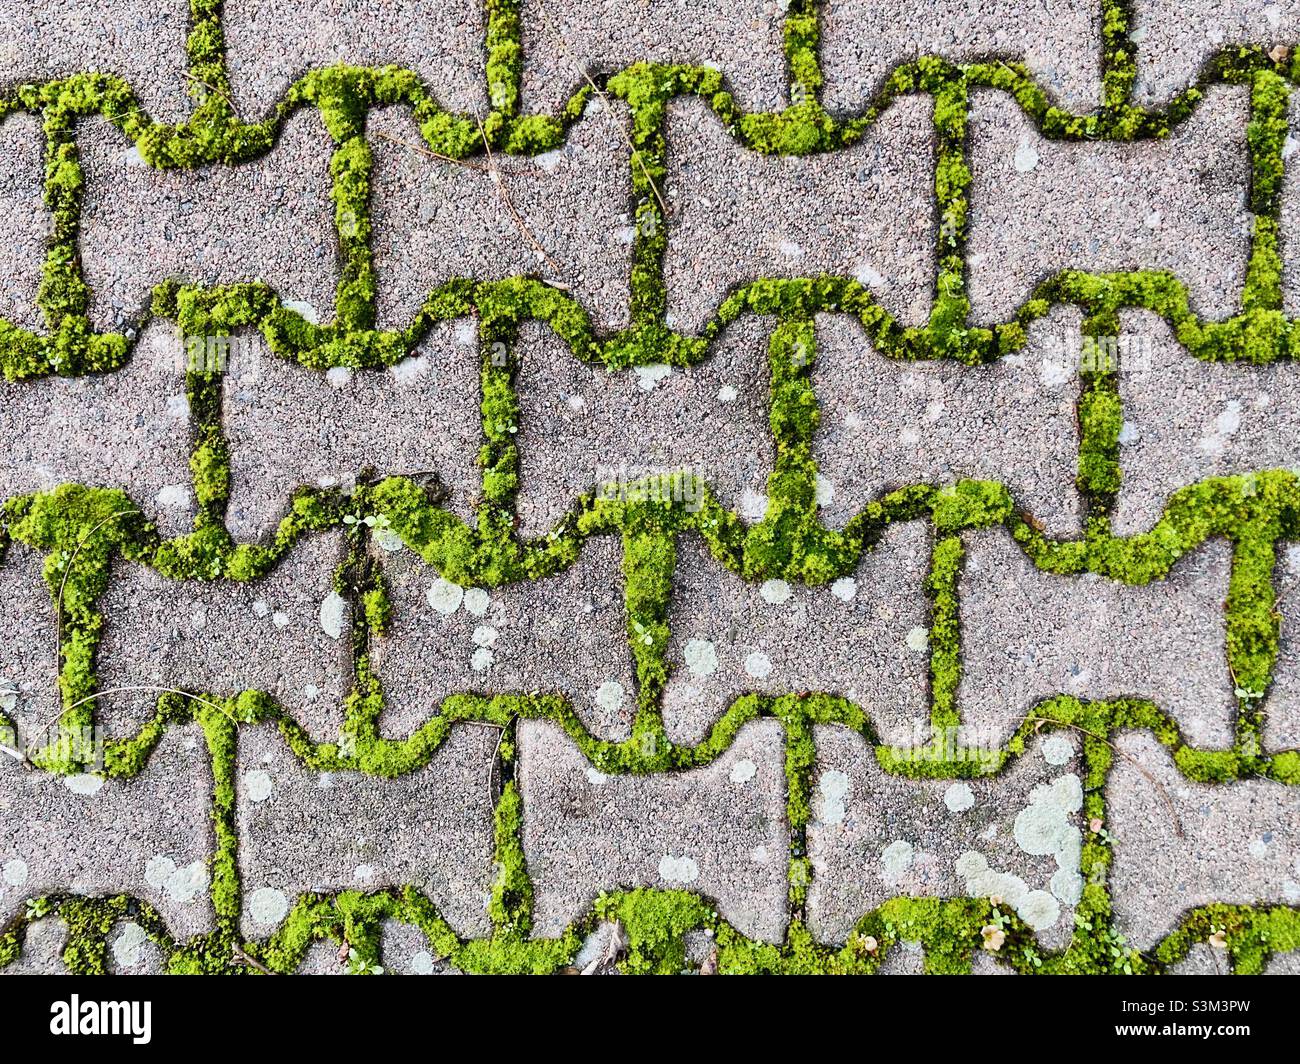 Paving stones overgrown with moss Stock Photo